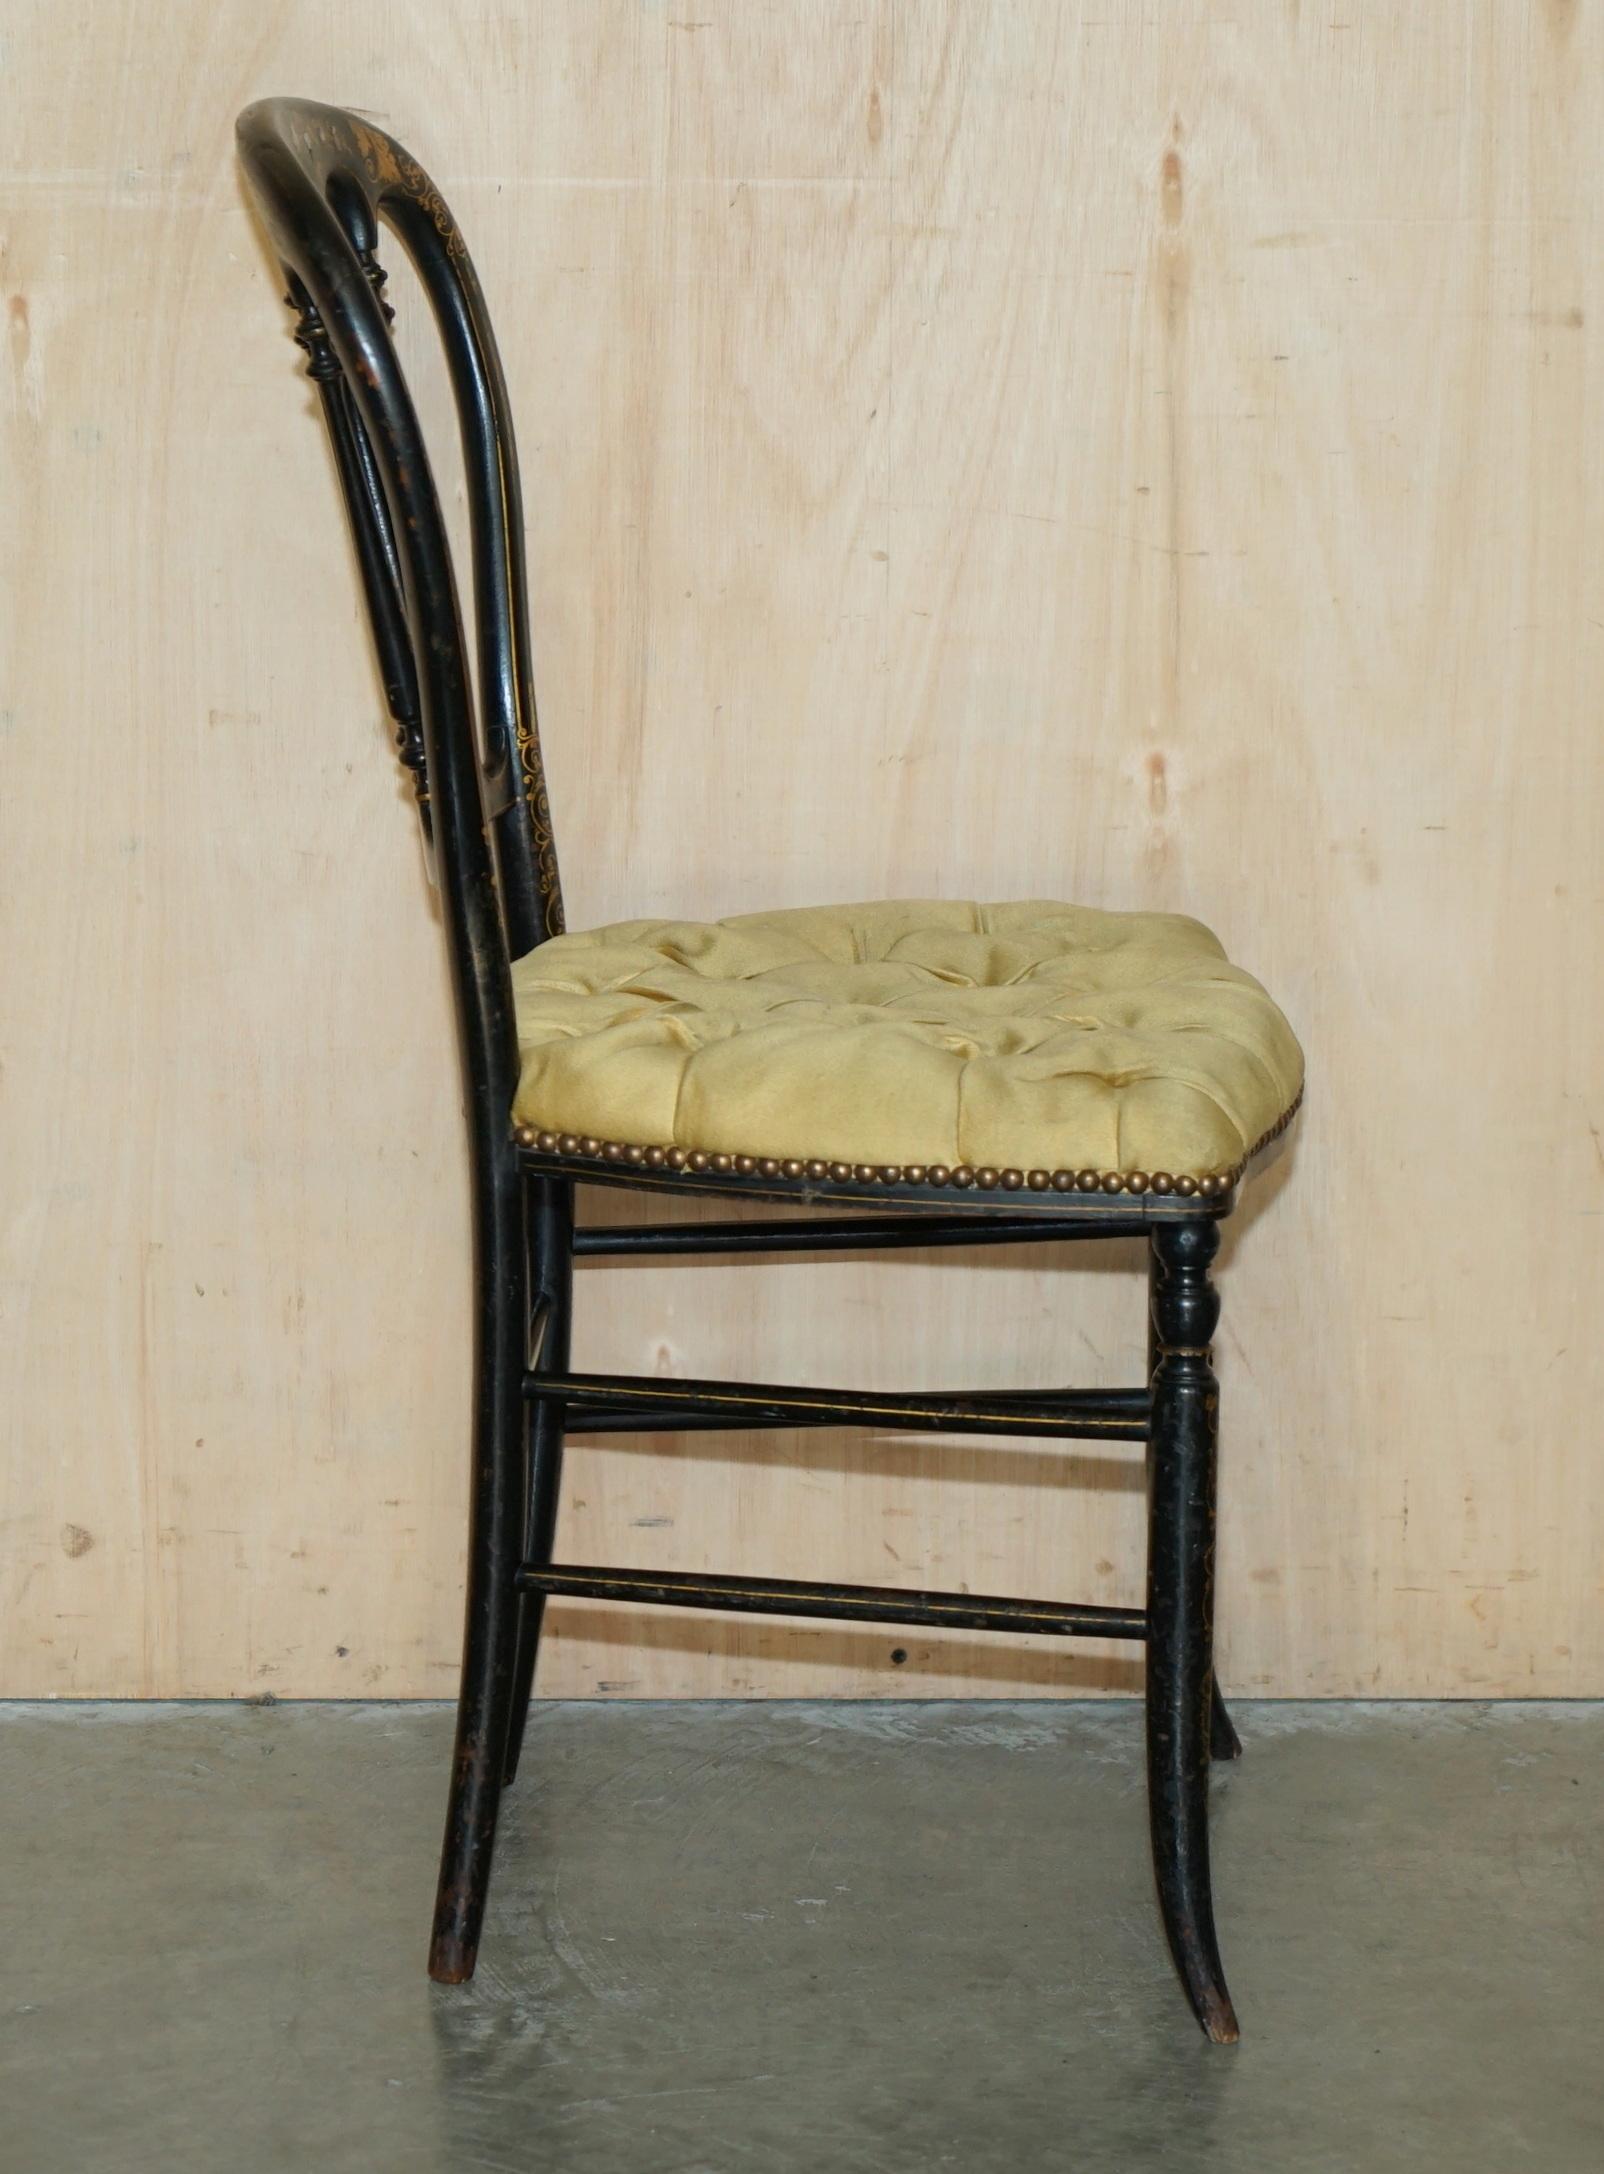 ANTIQUE REGENCY 1815 EBONiSED MOTHER OF PEARL SILK CHESTERFIELD SEAT SIDE CHAIR For Sale 10